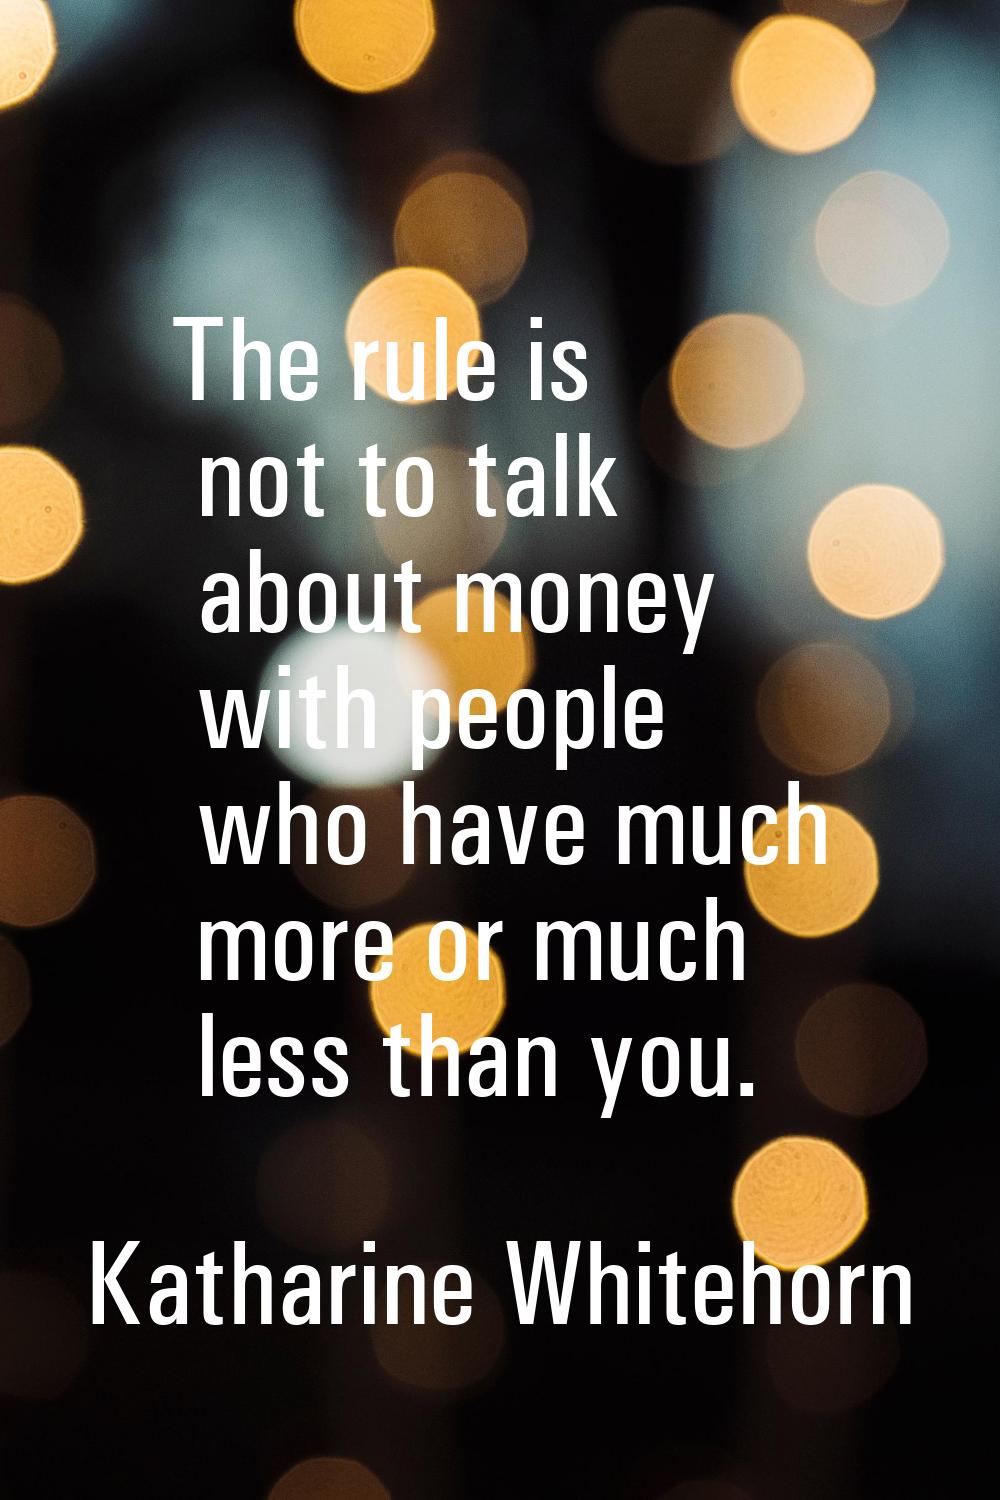 The rule is not to talk about money with people who have much more or much less than you.